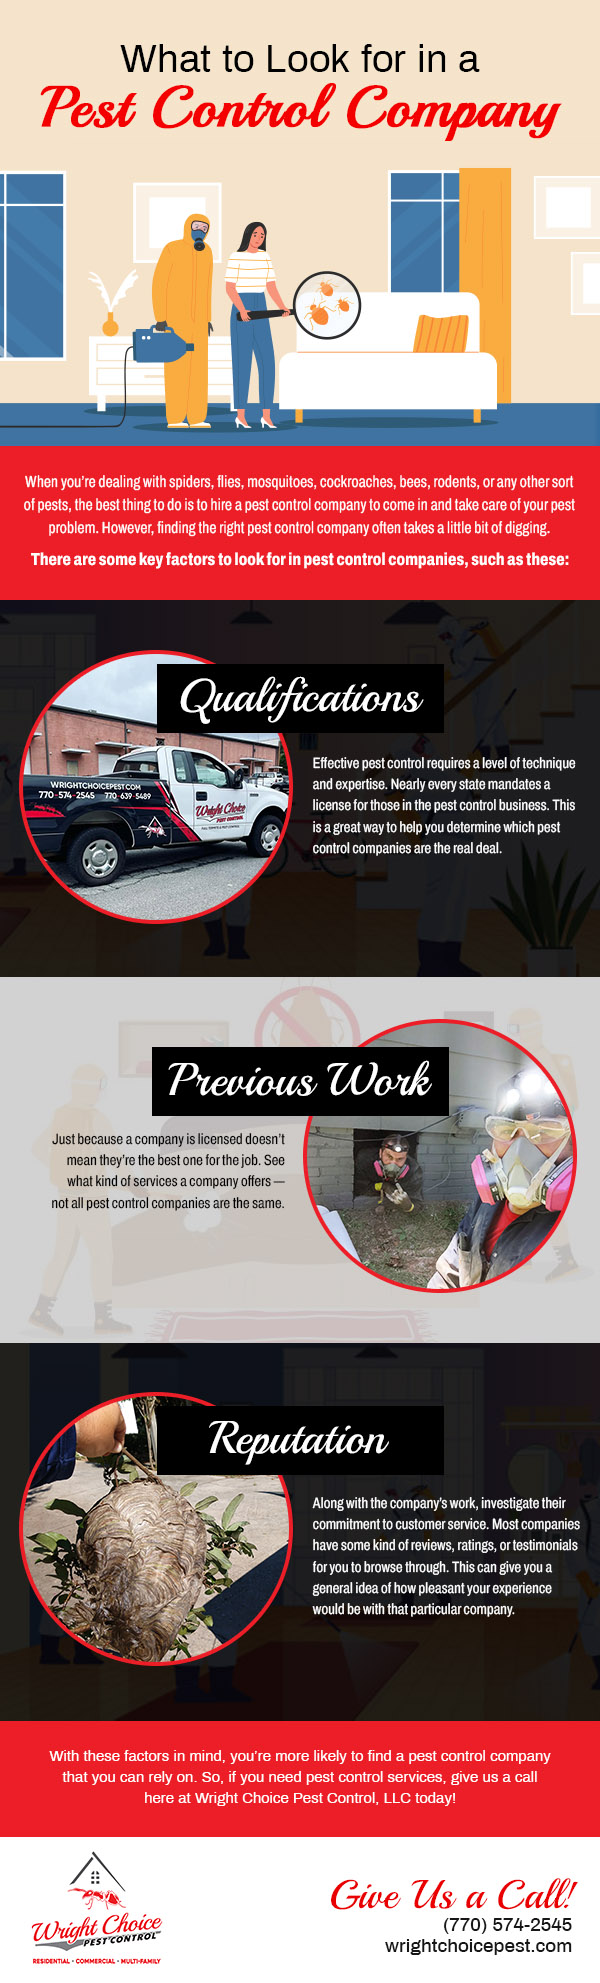 What to Look for in a Pest Control Company